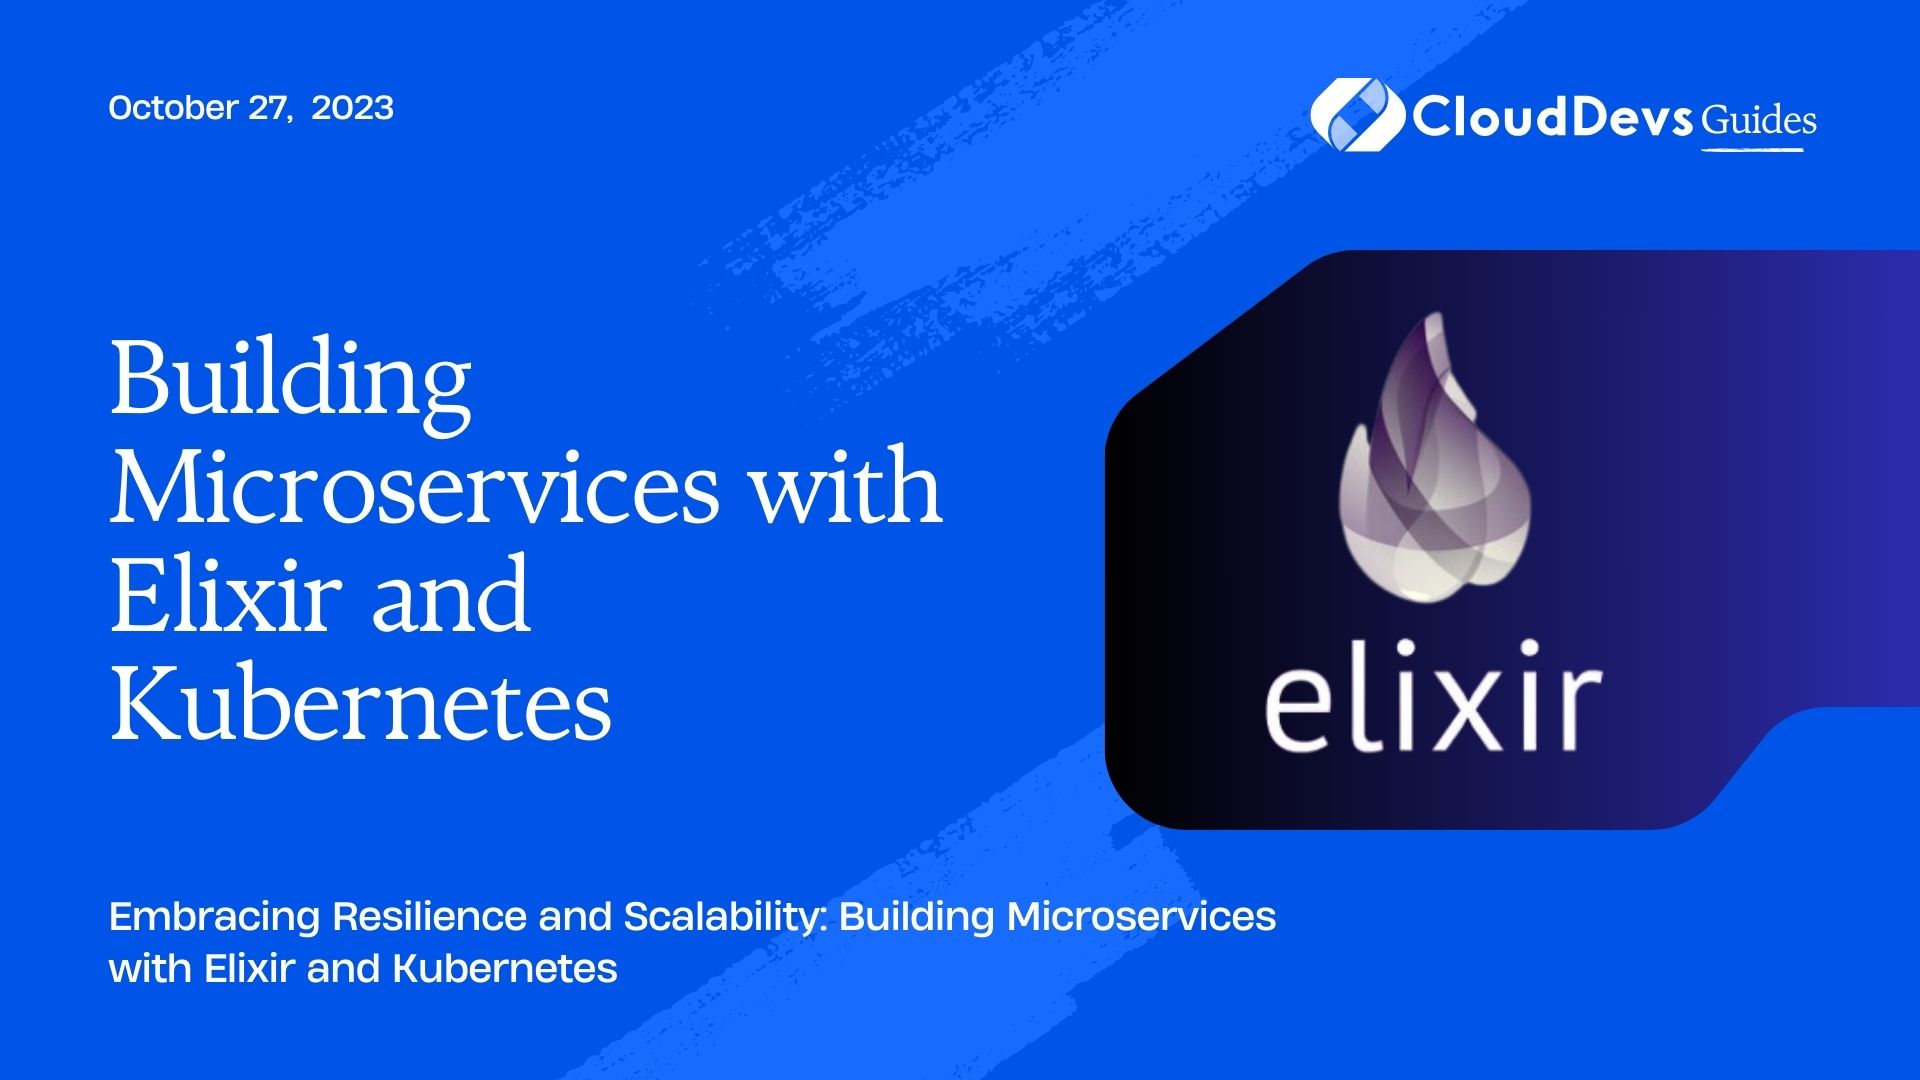 Building Microservices with Elixir and Kubernetes